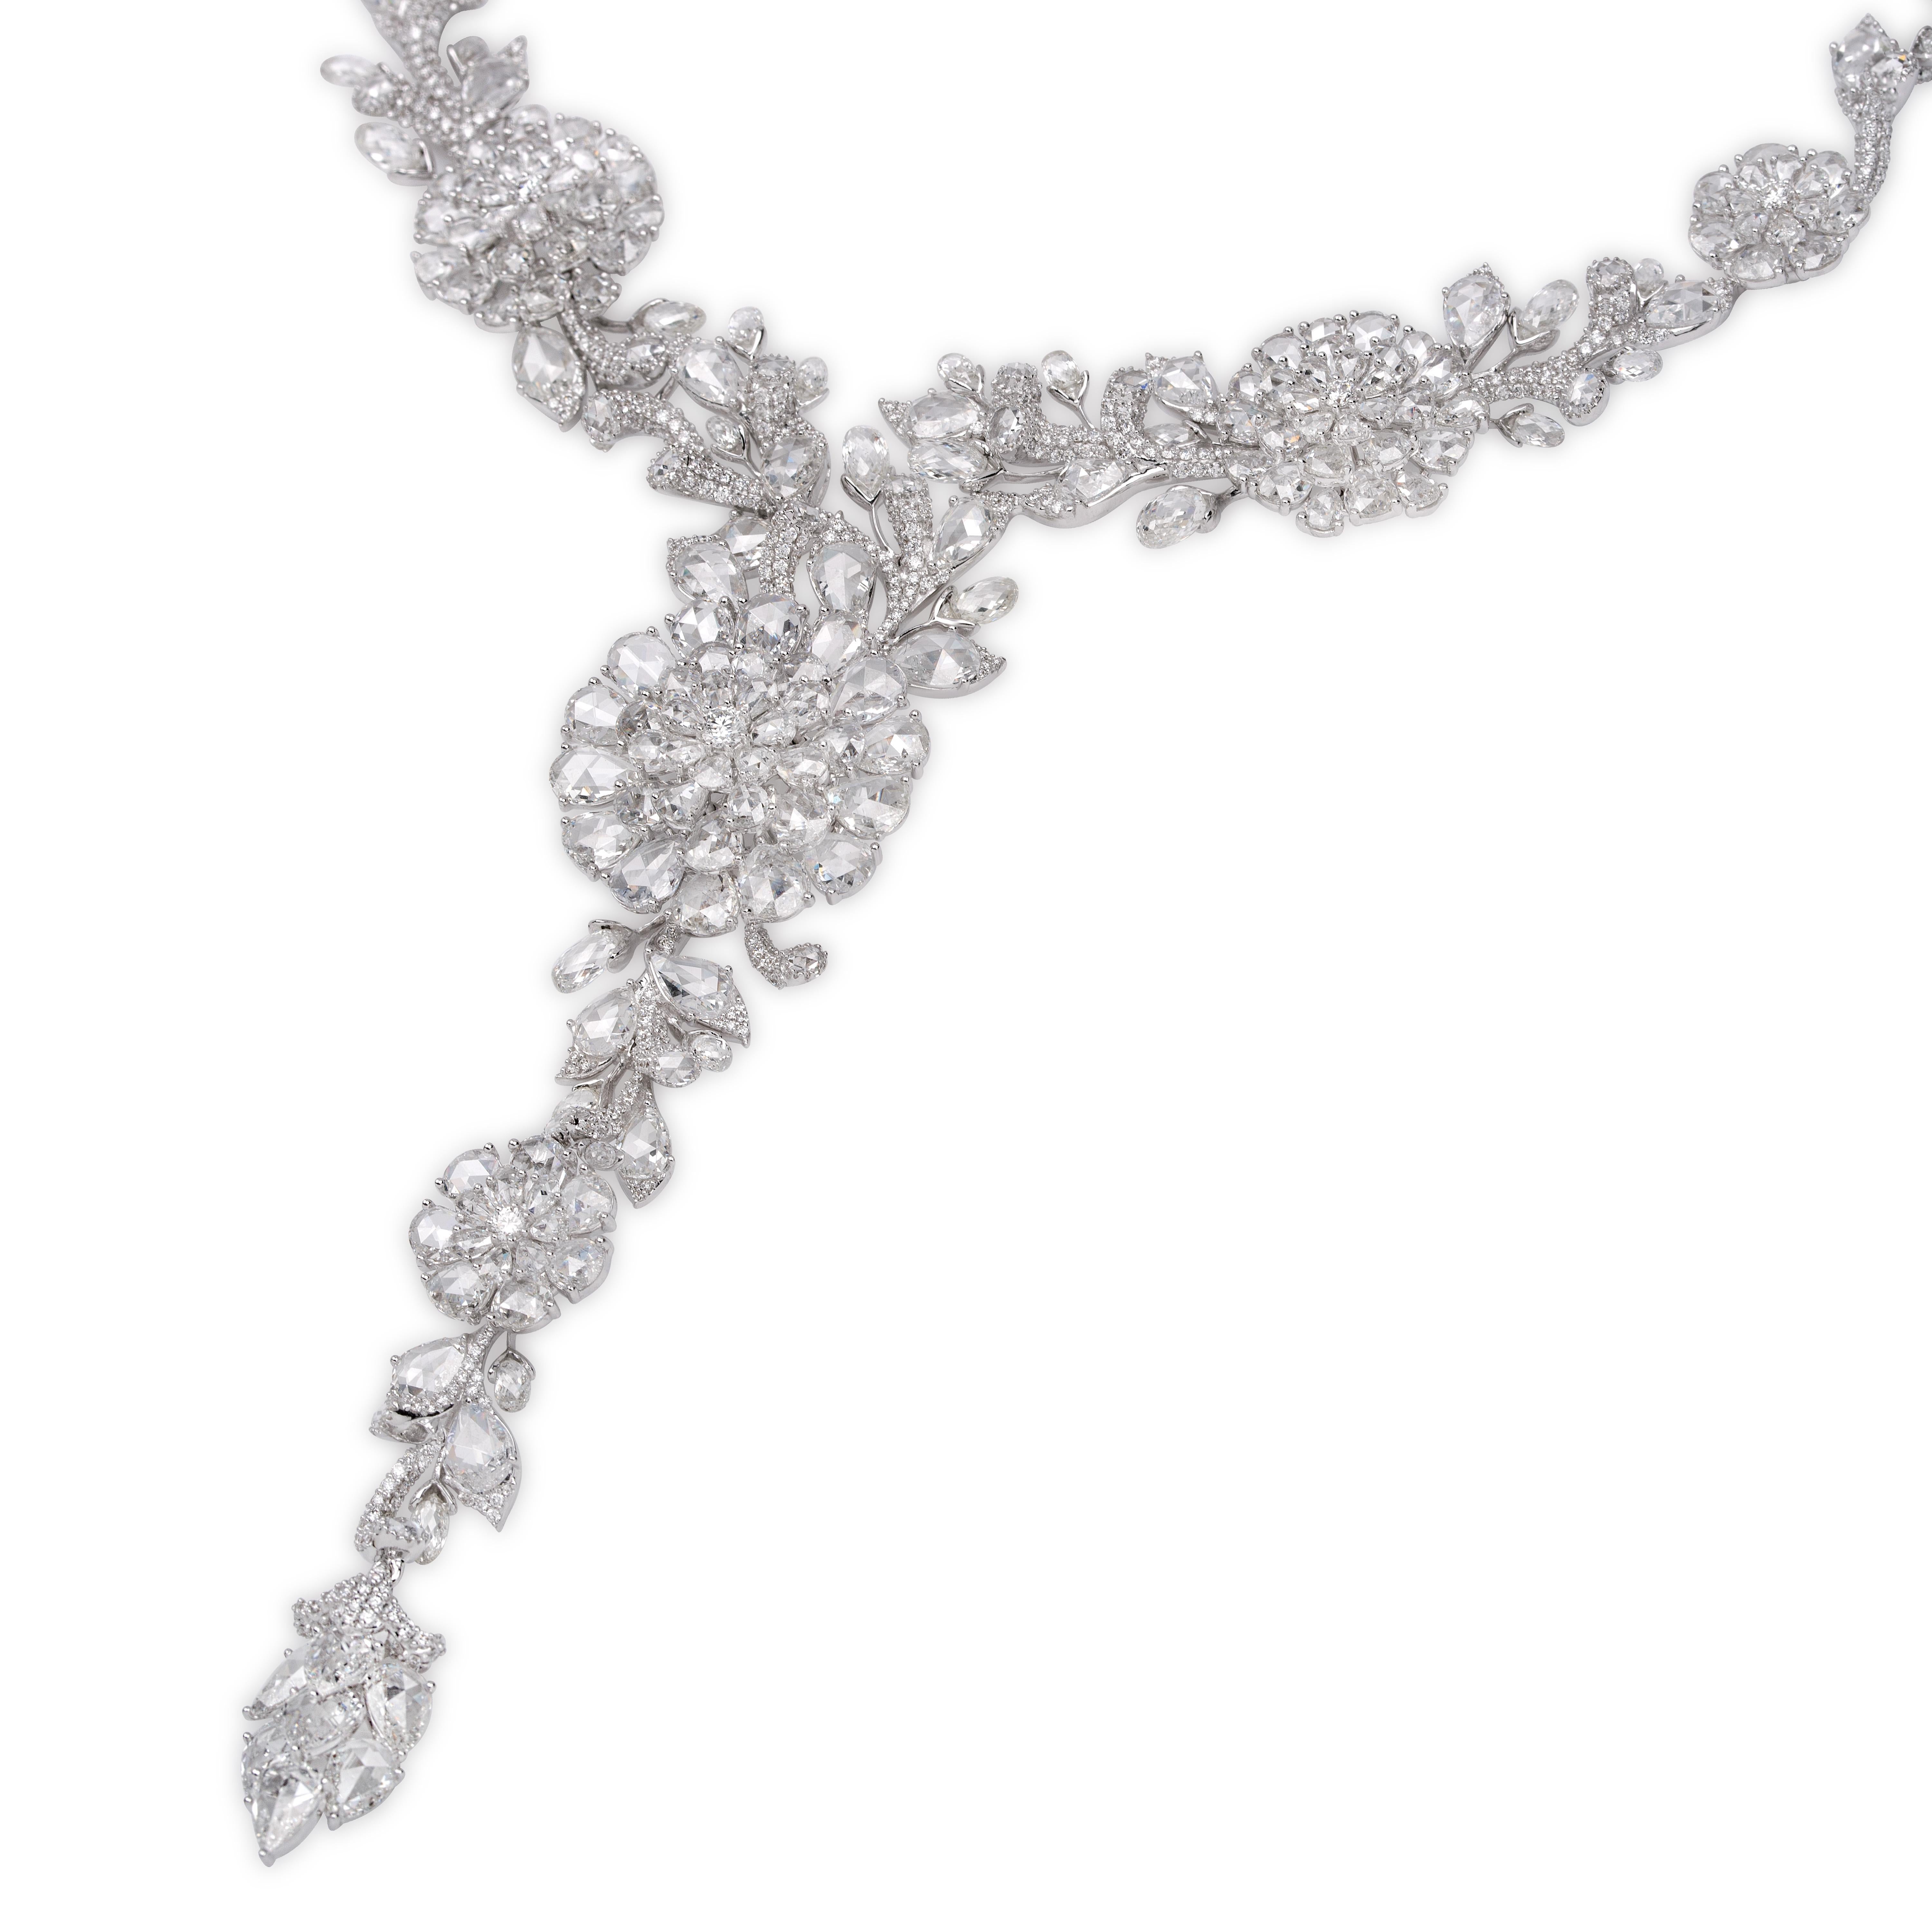 This magnificent necklace from our Rarever High Jewelry Collection is studded with 275 top quality white Rose cut diamonds , 1271 brilliant round shaped diamonds. This 18-karat gold necklace is handmade with each diamond individually inspected and